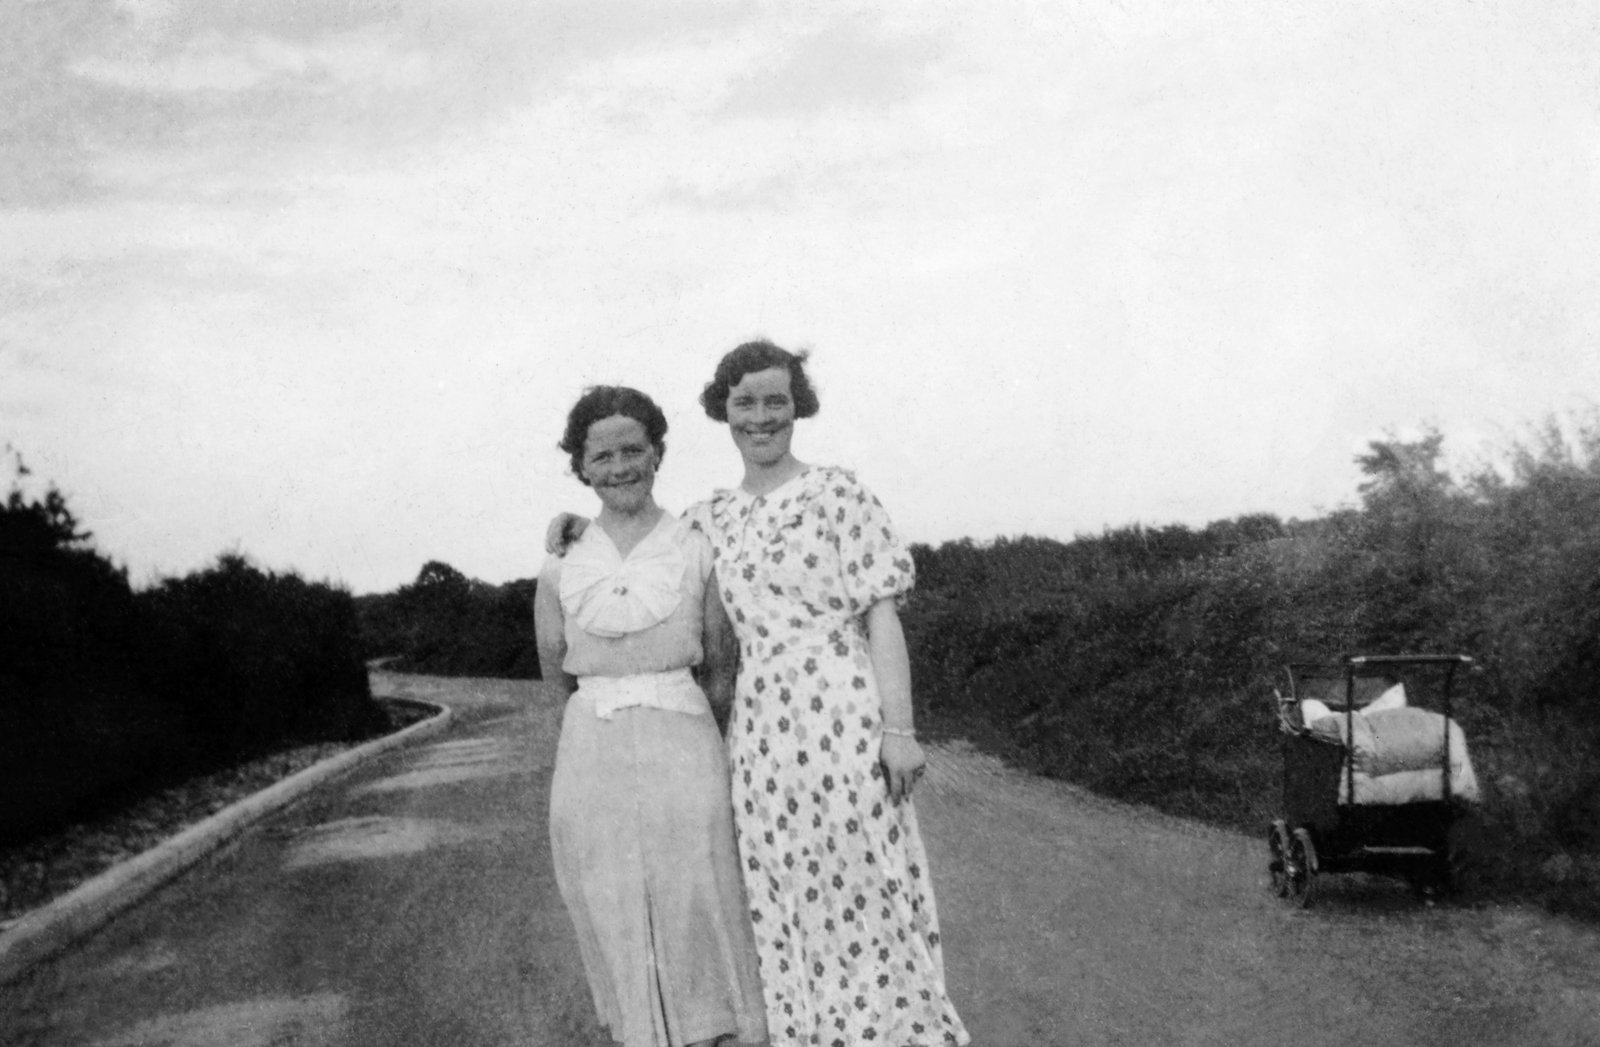 Eva Clerkin (right) with a friend, Monaghan, 1940s.